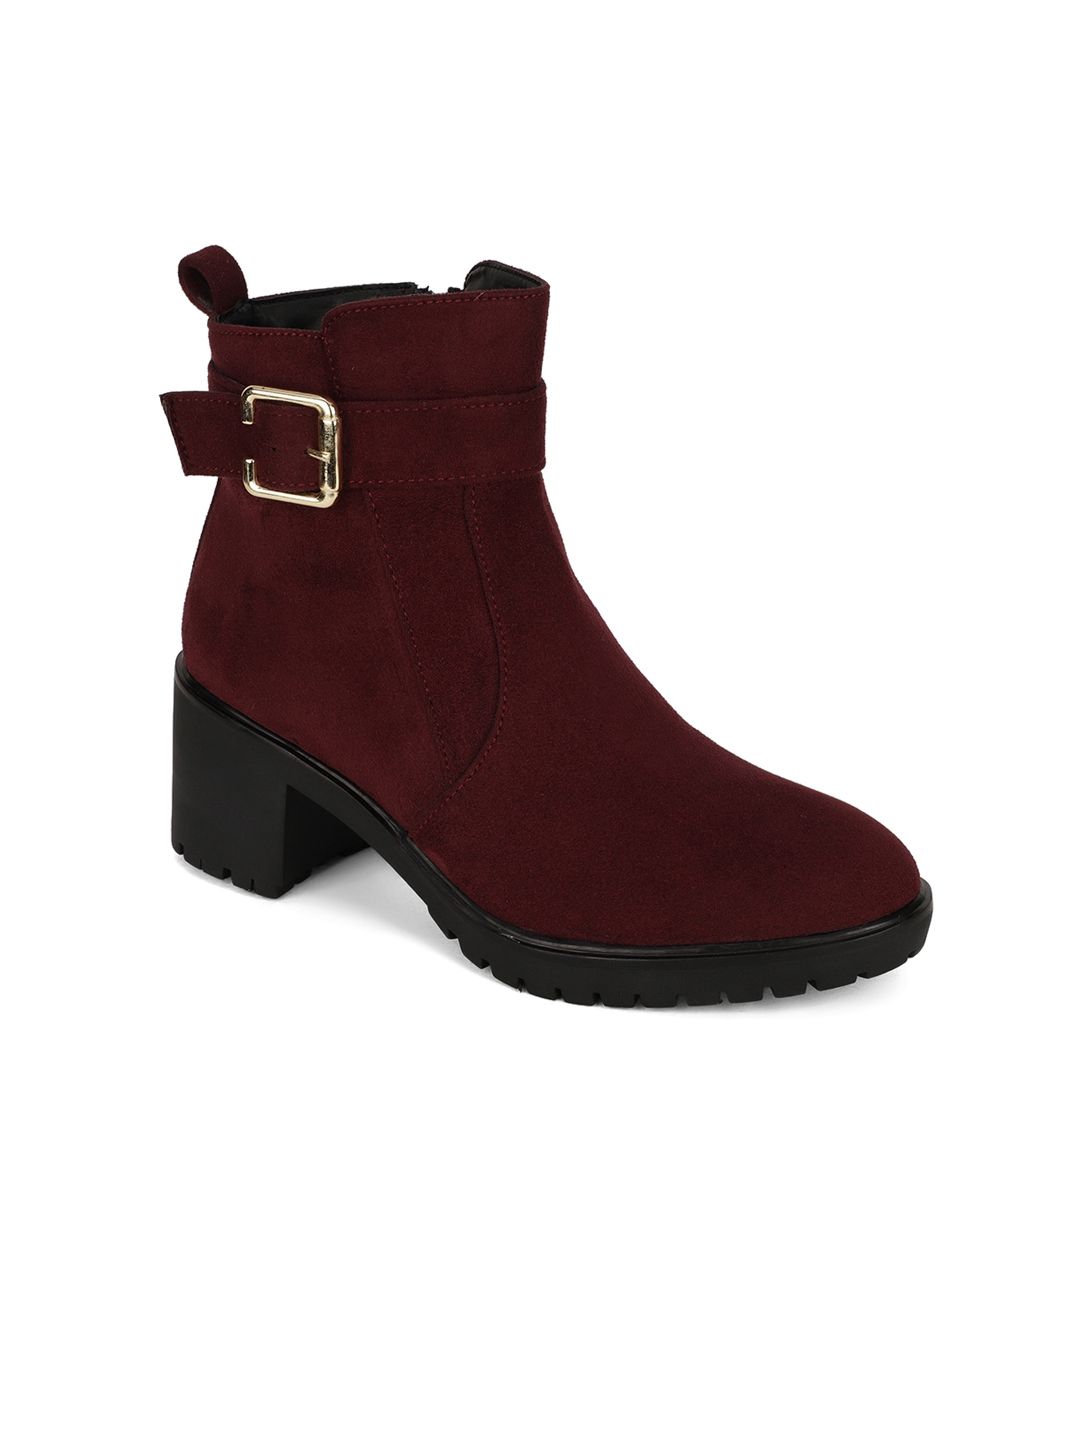 Bruno Manetti Maroon Suede Block Heeled Boots with Buckles Price in India